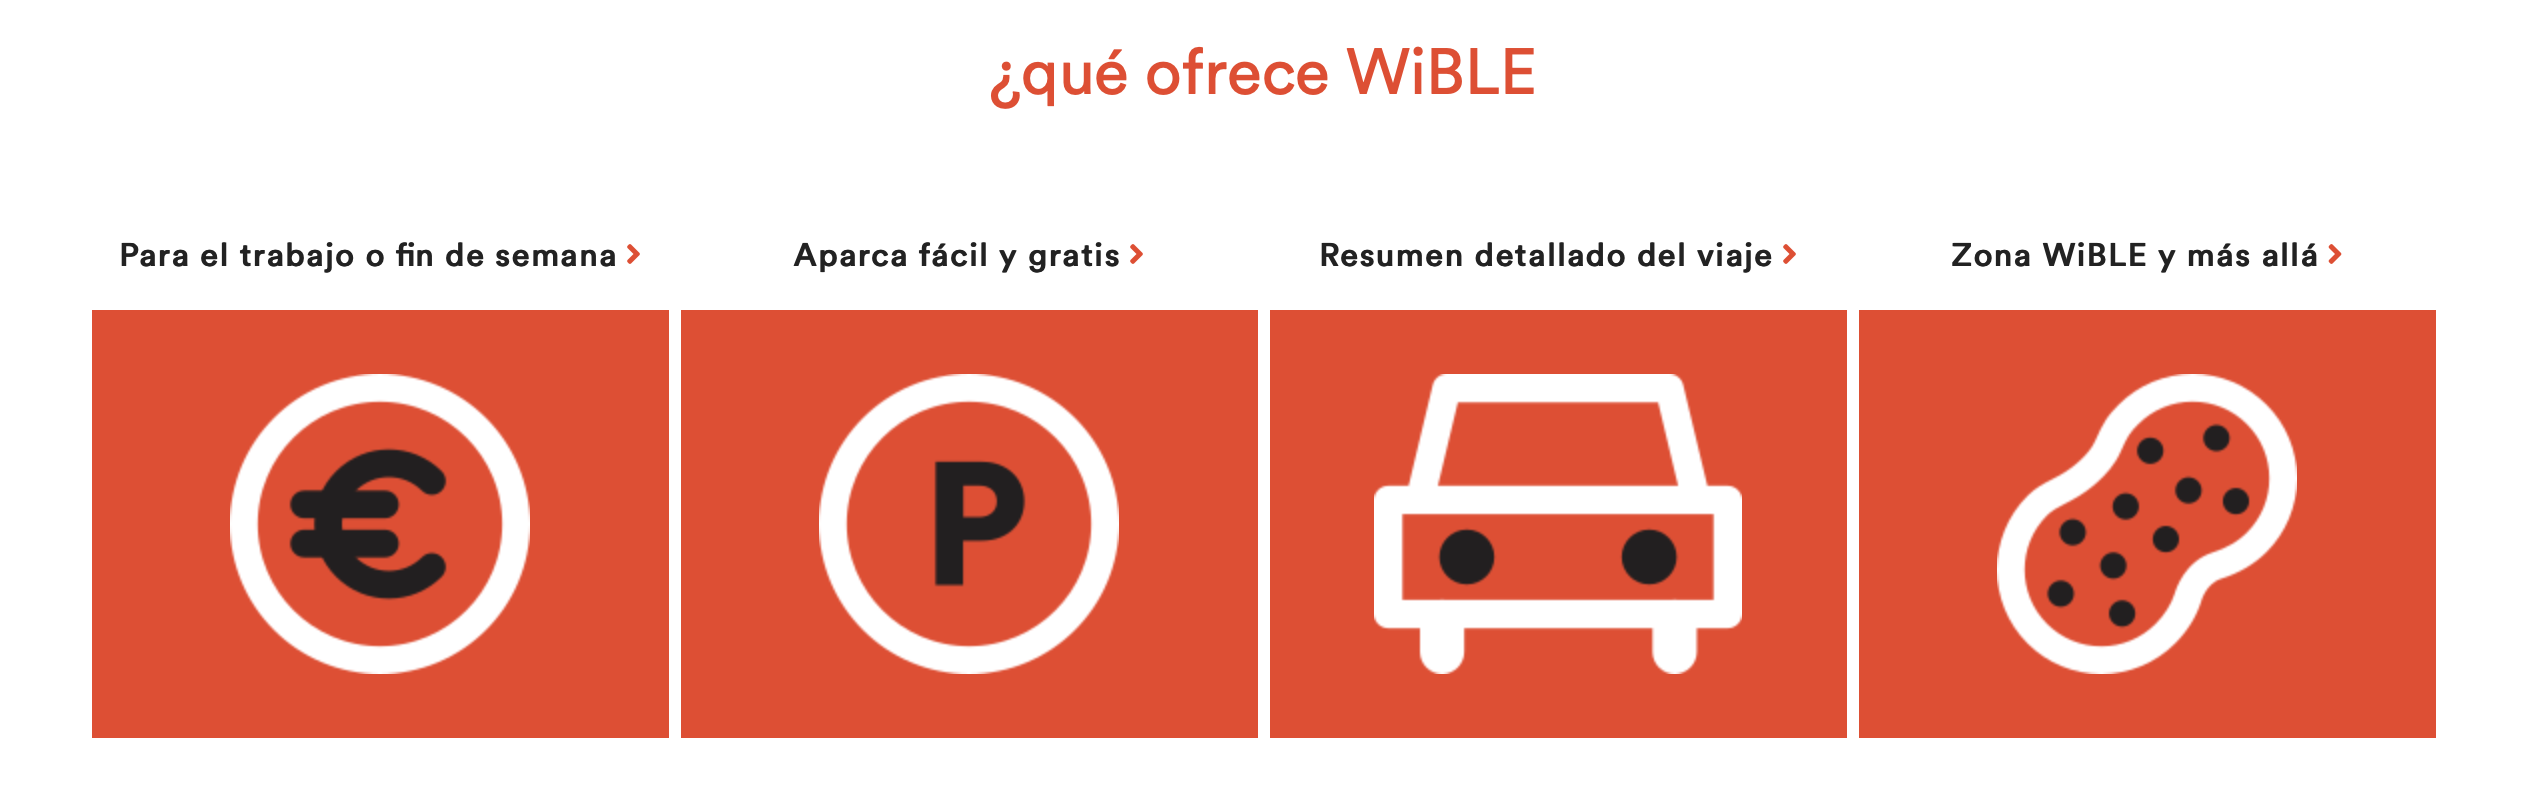 Wible